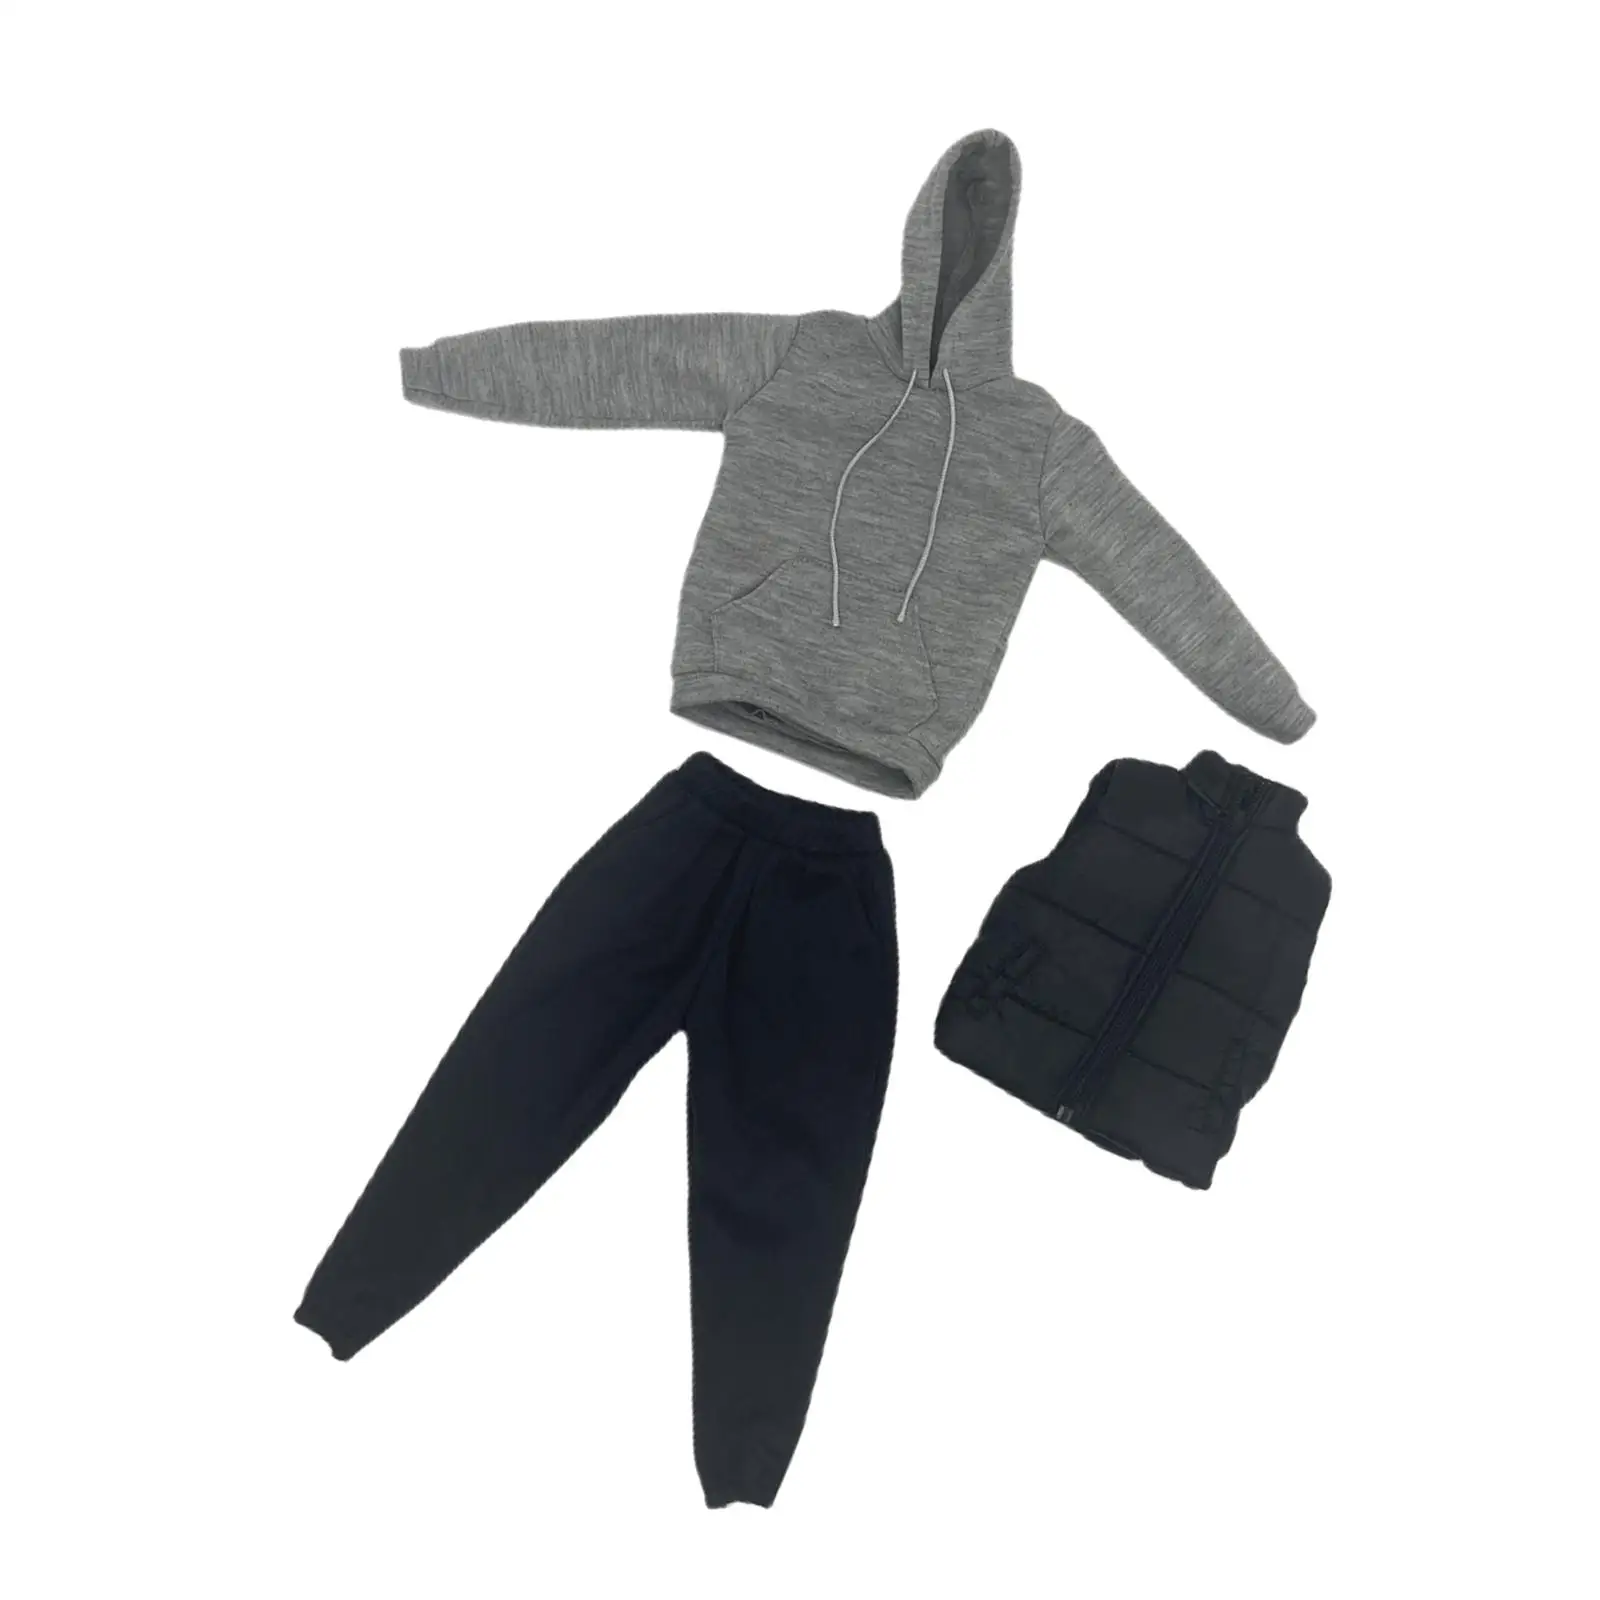 3 Pieces 1:6`s Clothes Includes Waistcoat, Top Hoodie and Pants for 12`` Action Figures Accessories